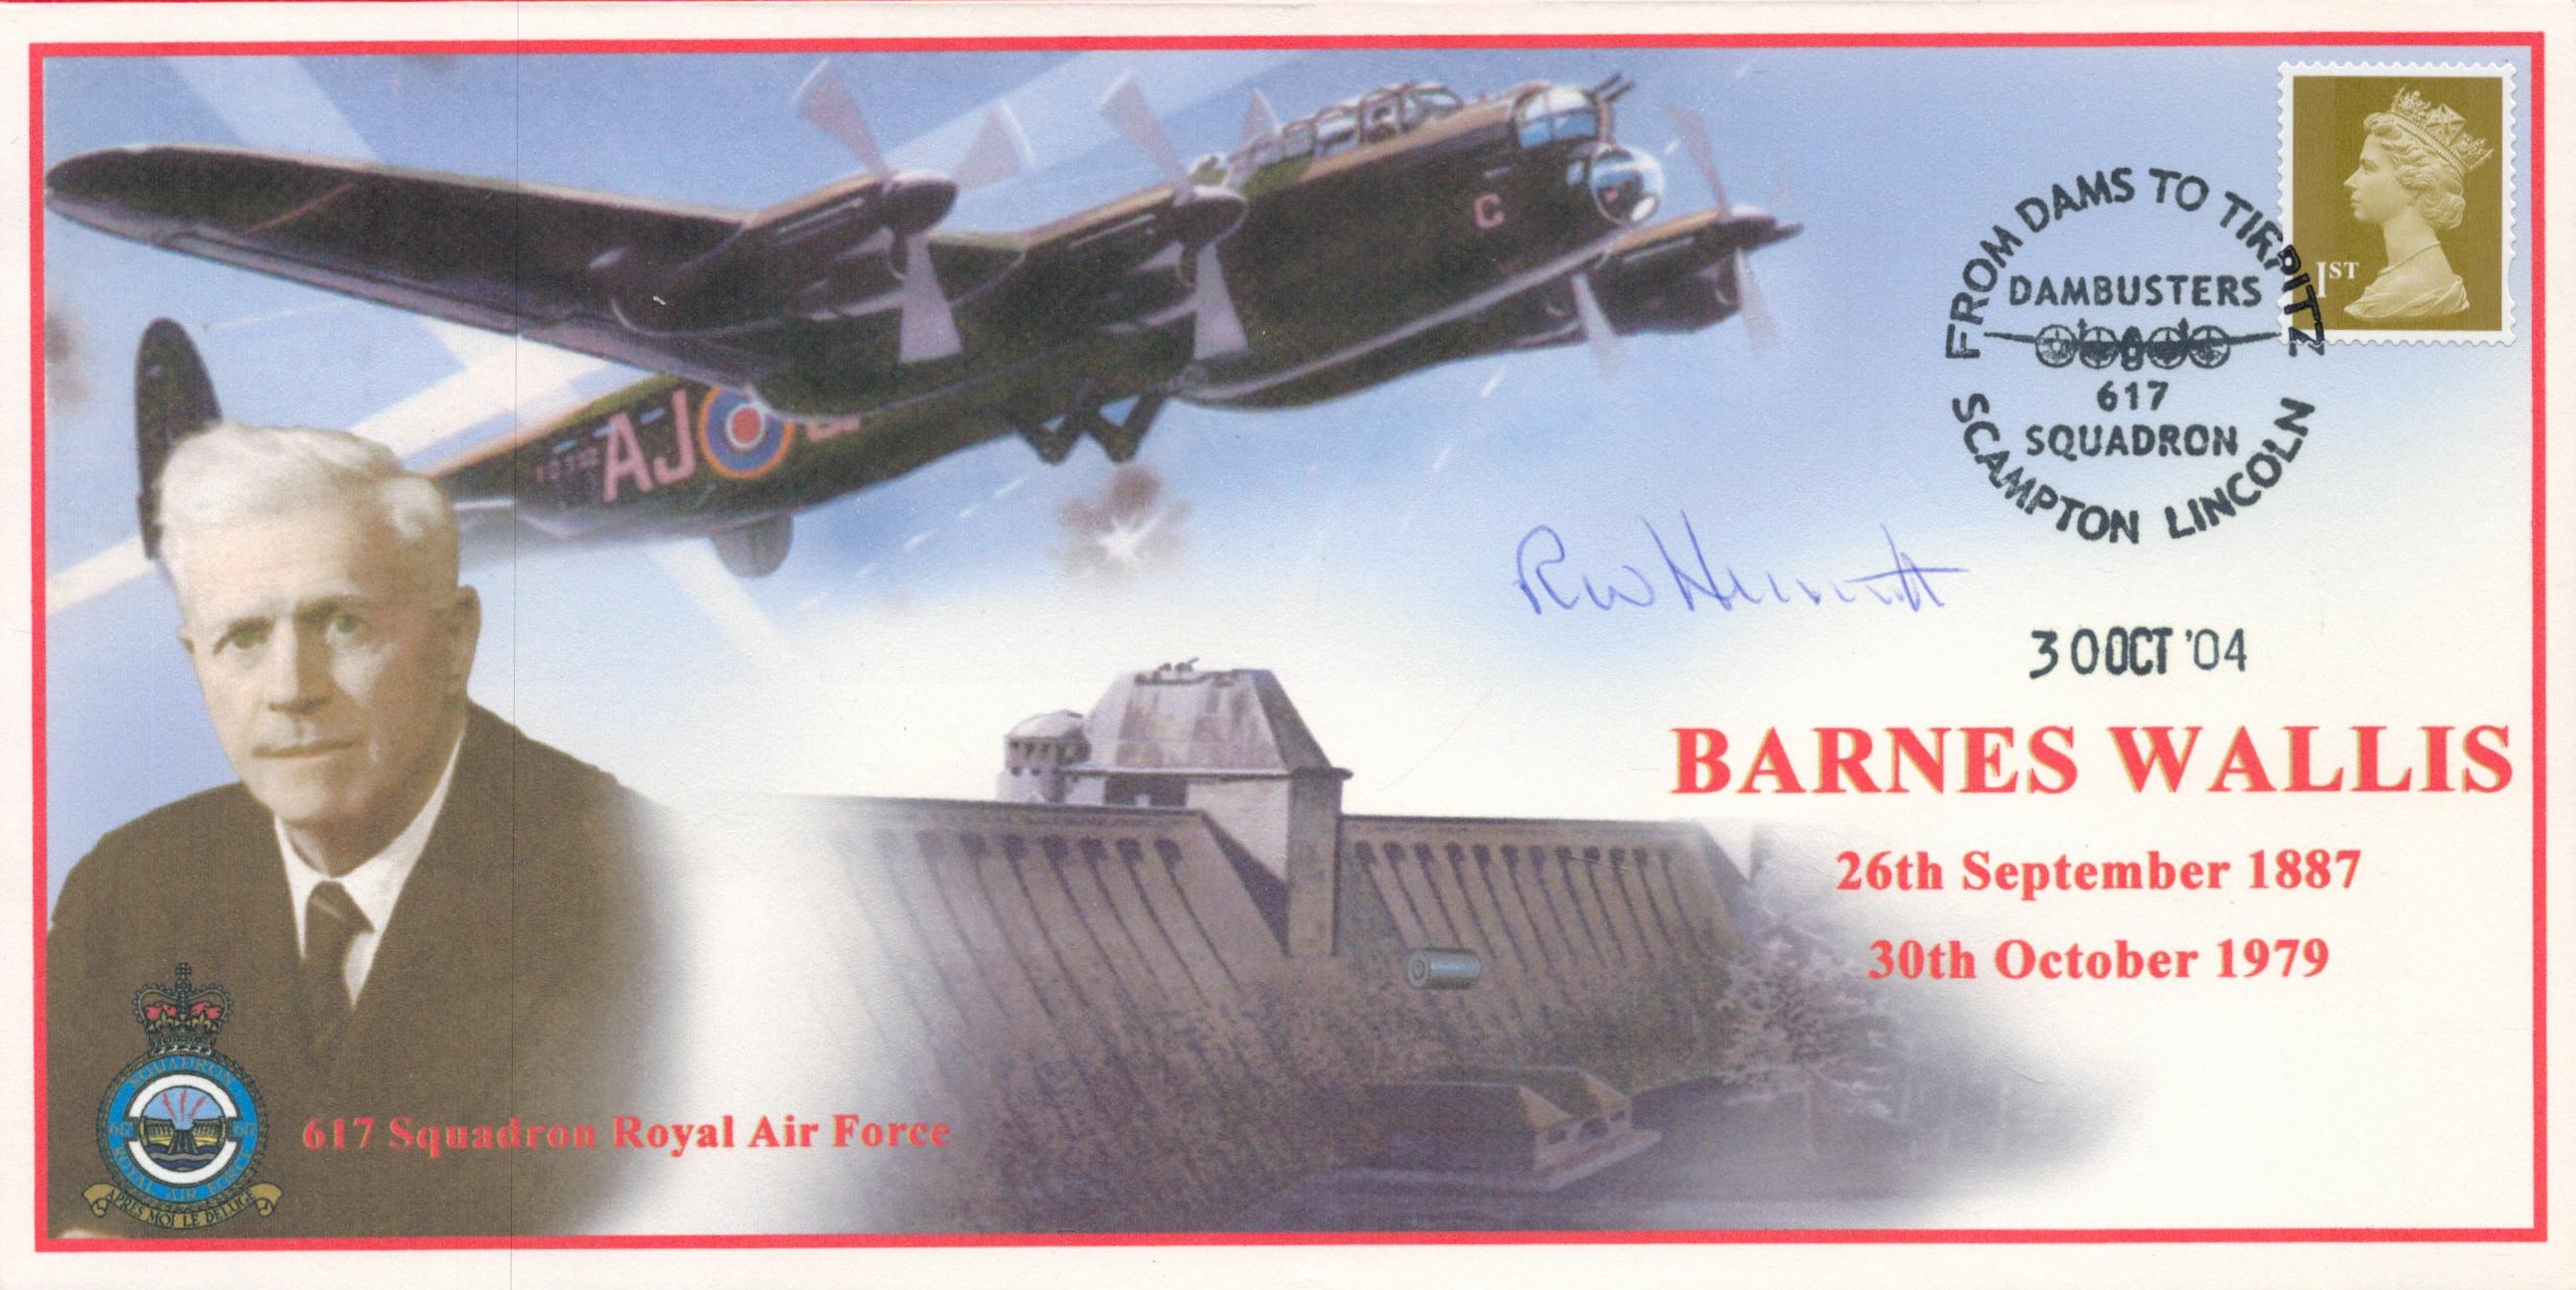 WW2 W/O Red Hunnisette Signed Barnes Wallis FDC. 4 of 5 Covers Issued. British stamp with 3 Oct 04